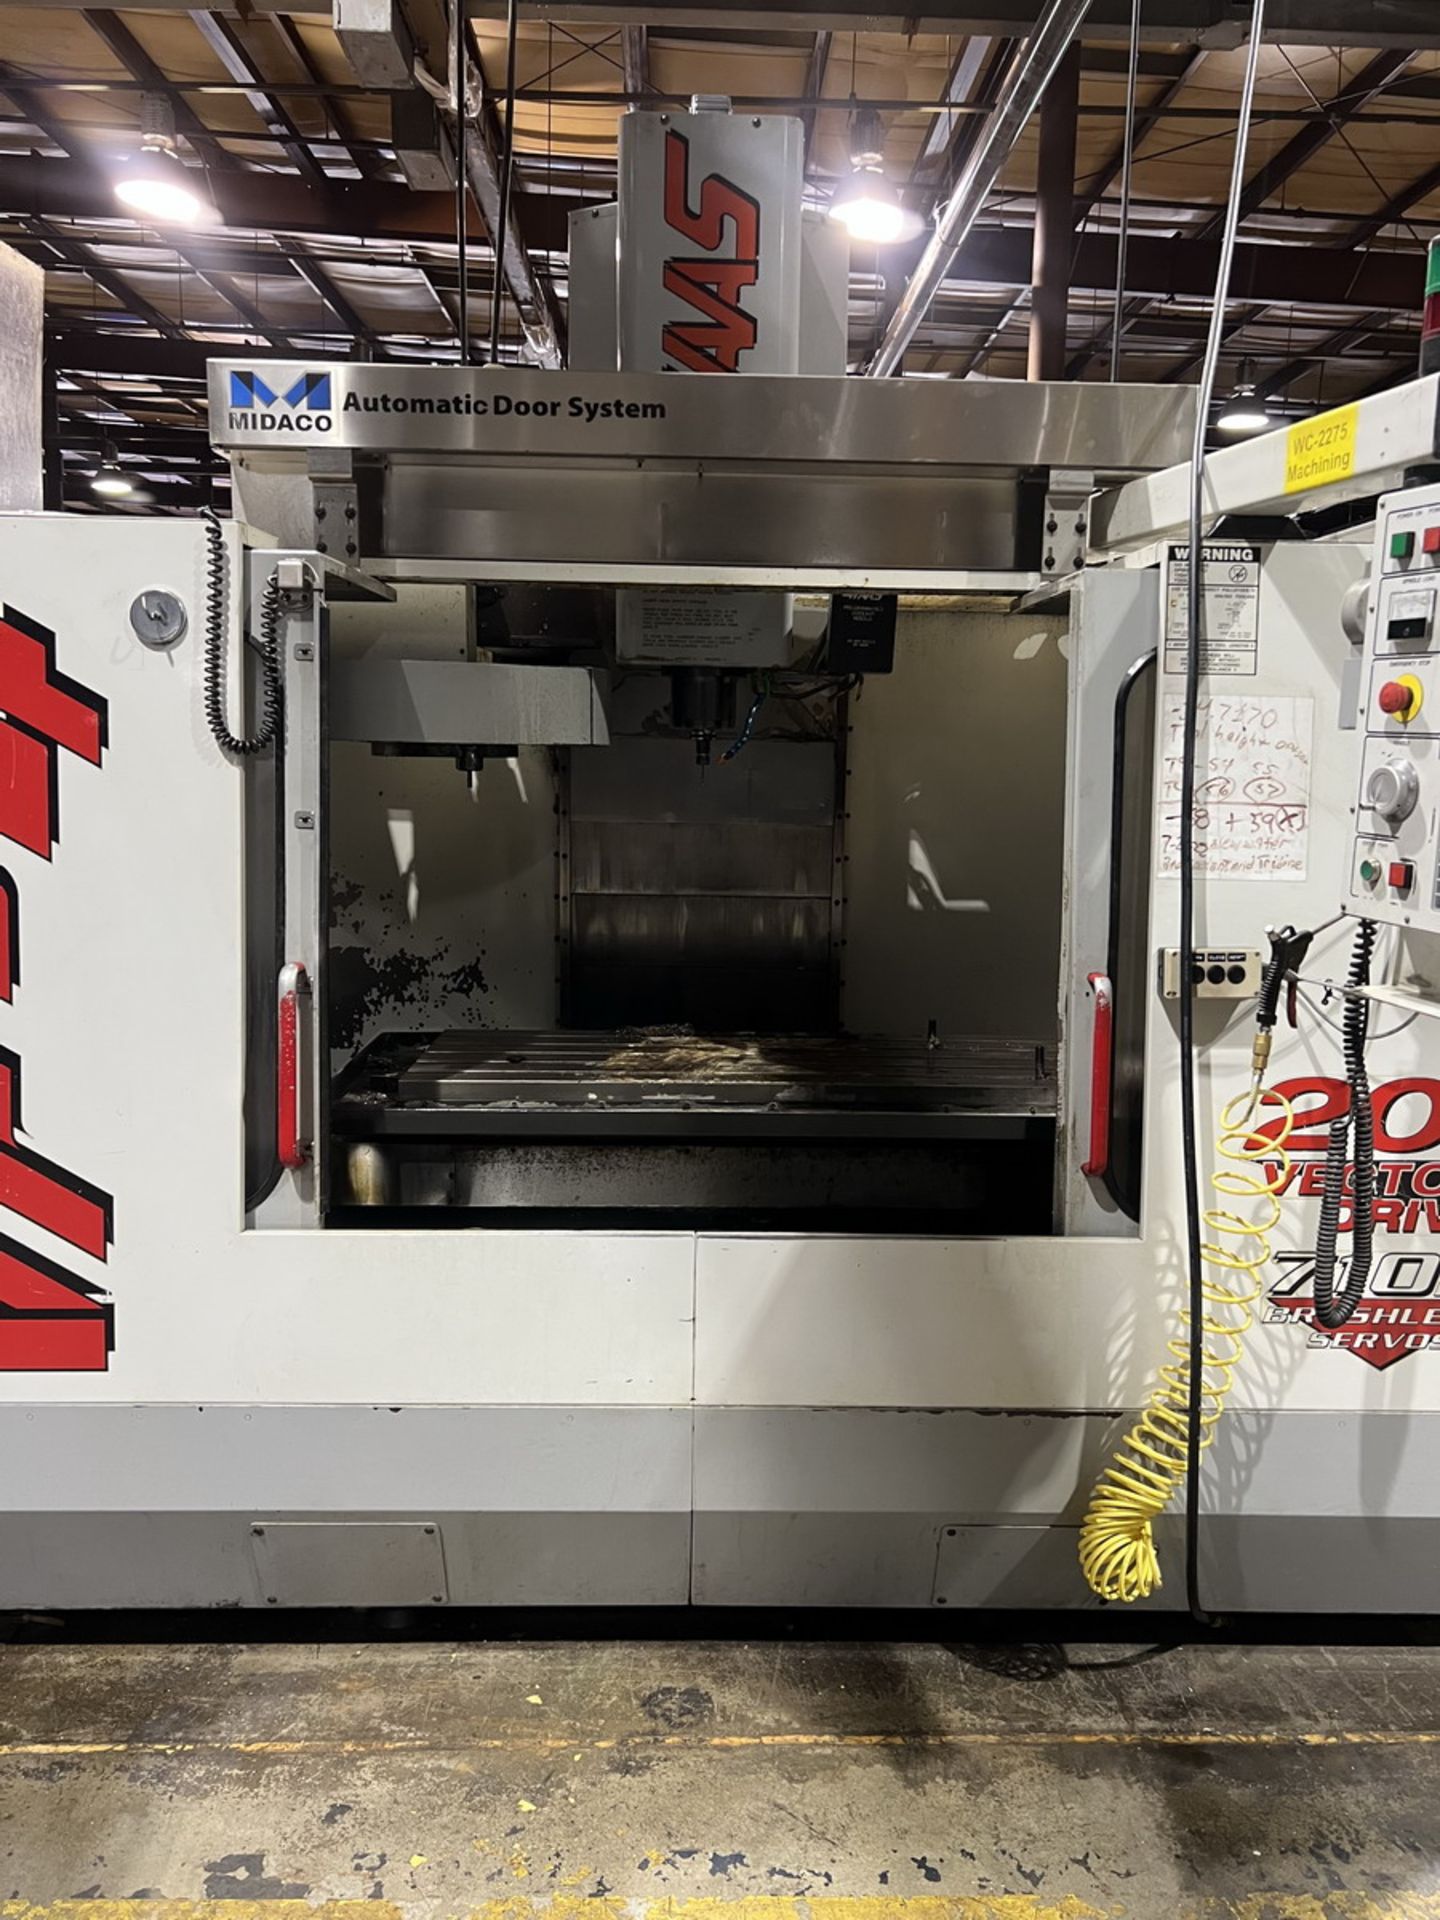 1998 Haas VF-4 3-Axis CNC Vertical Milling Machine - Image 5 of 12